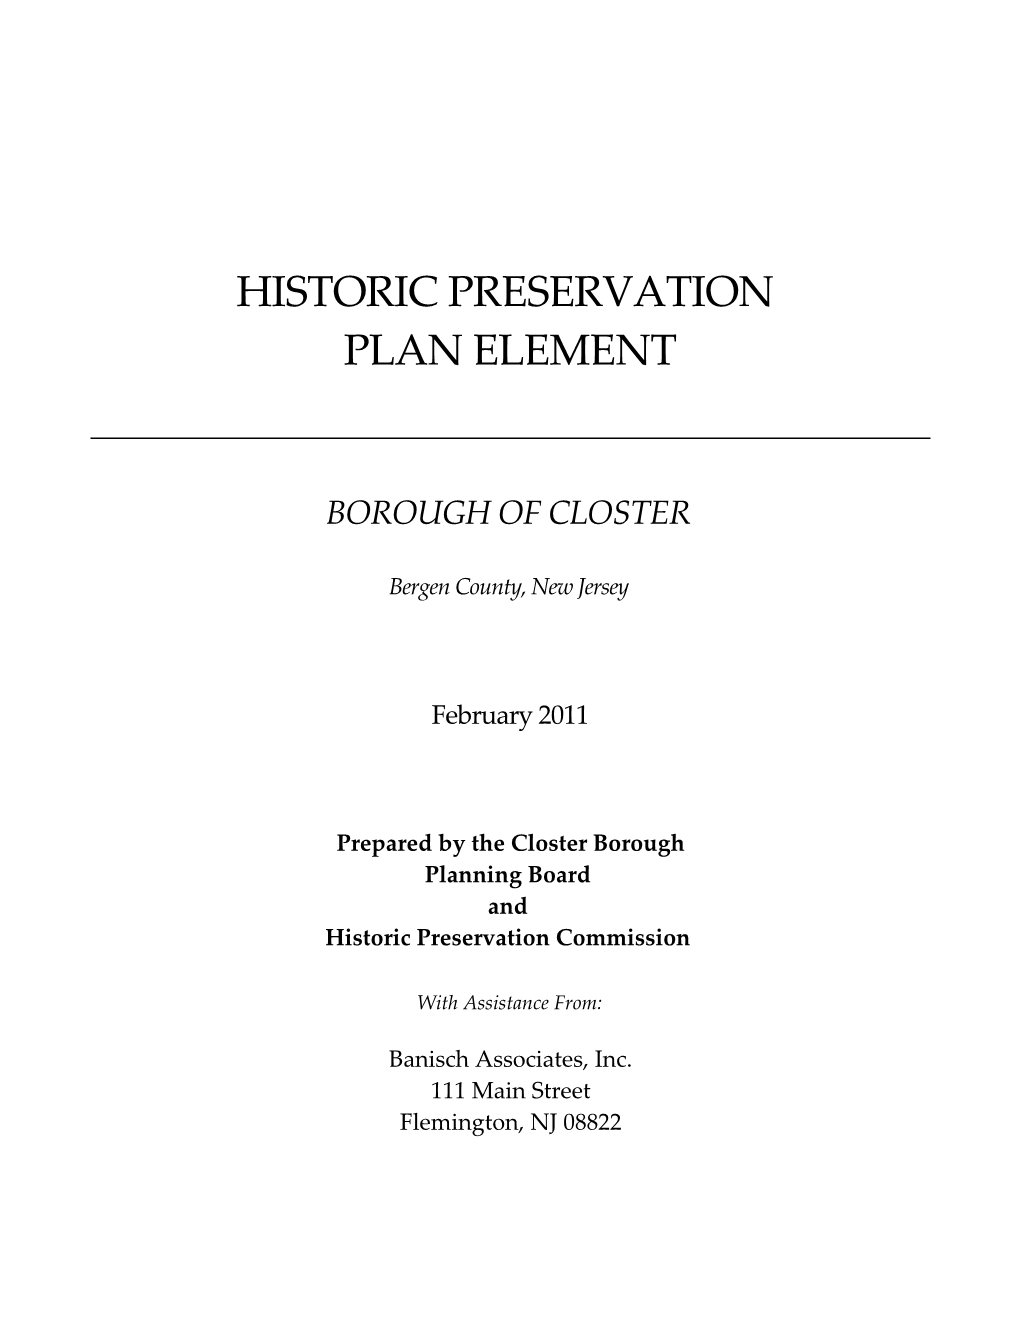 Closter Historic Preservation Plan February 2011